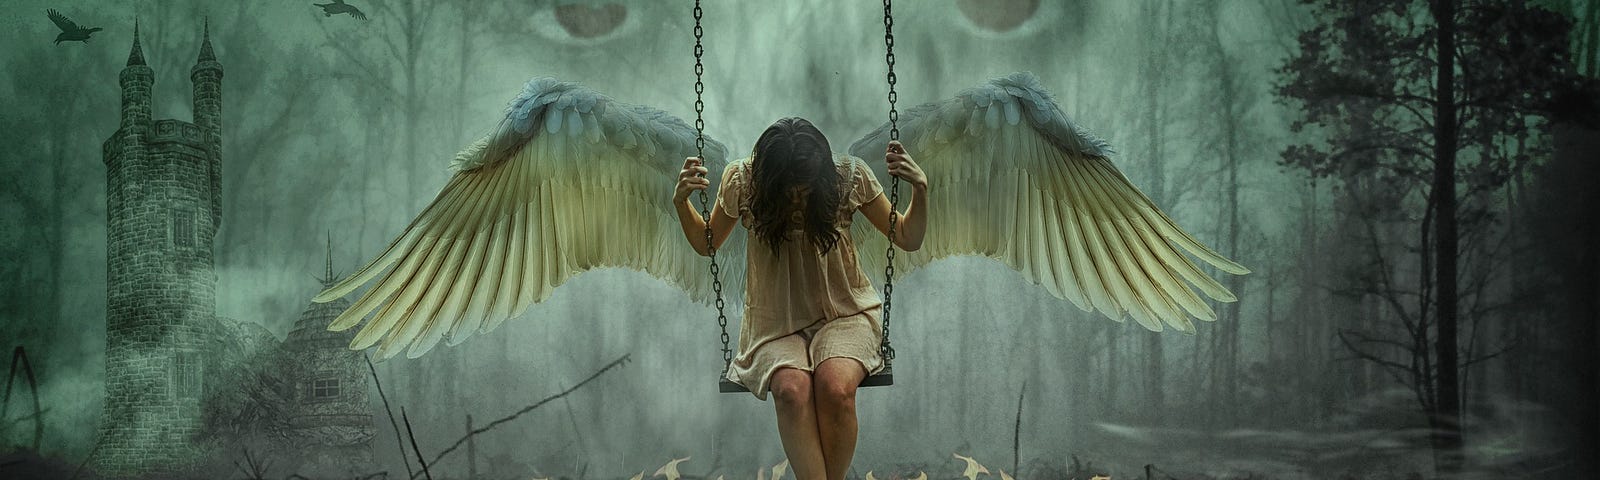 A girl with wings on a swing. Her feet are surrounded by a ring of fire, and there are giant eyes looking down on her from the cloudy sky.